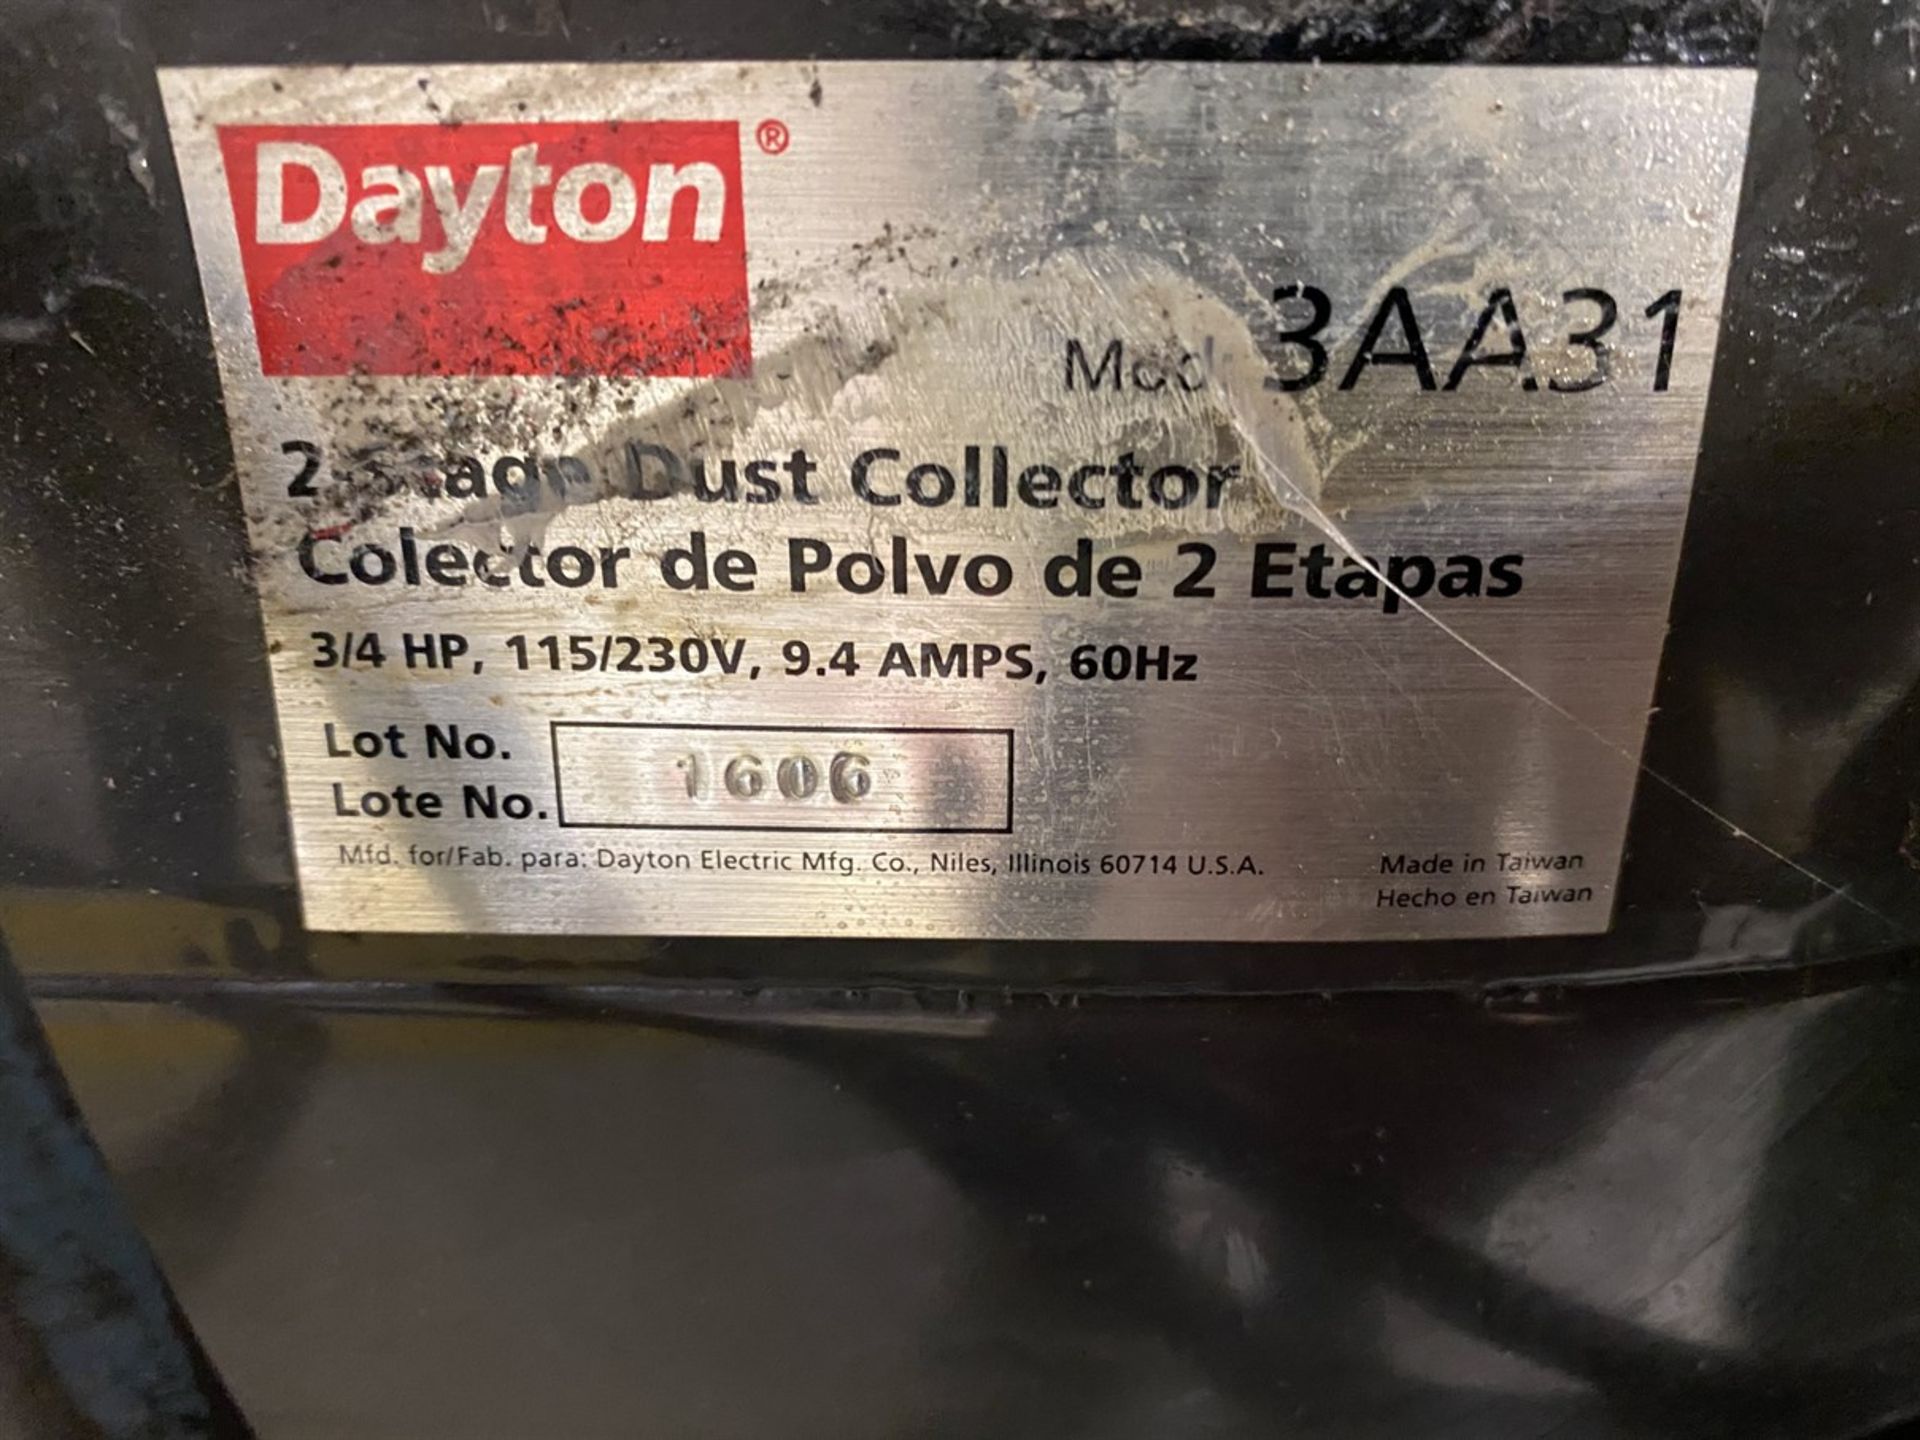 DAYTON 3AA31 2-Stage Dust Collector, s/n 1606, 3/4 HP - Image 3 of 3